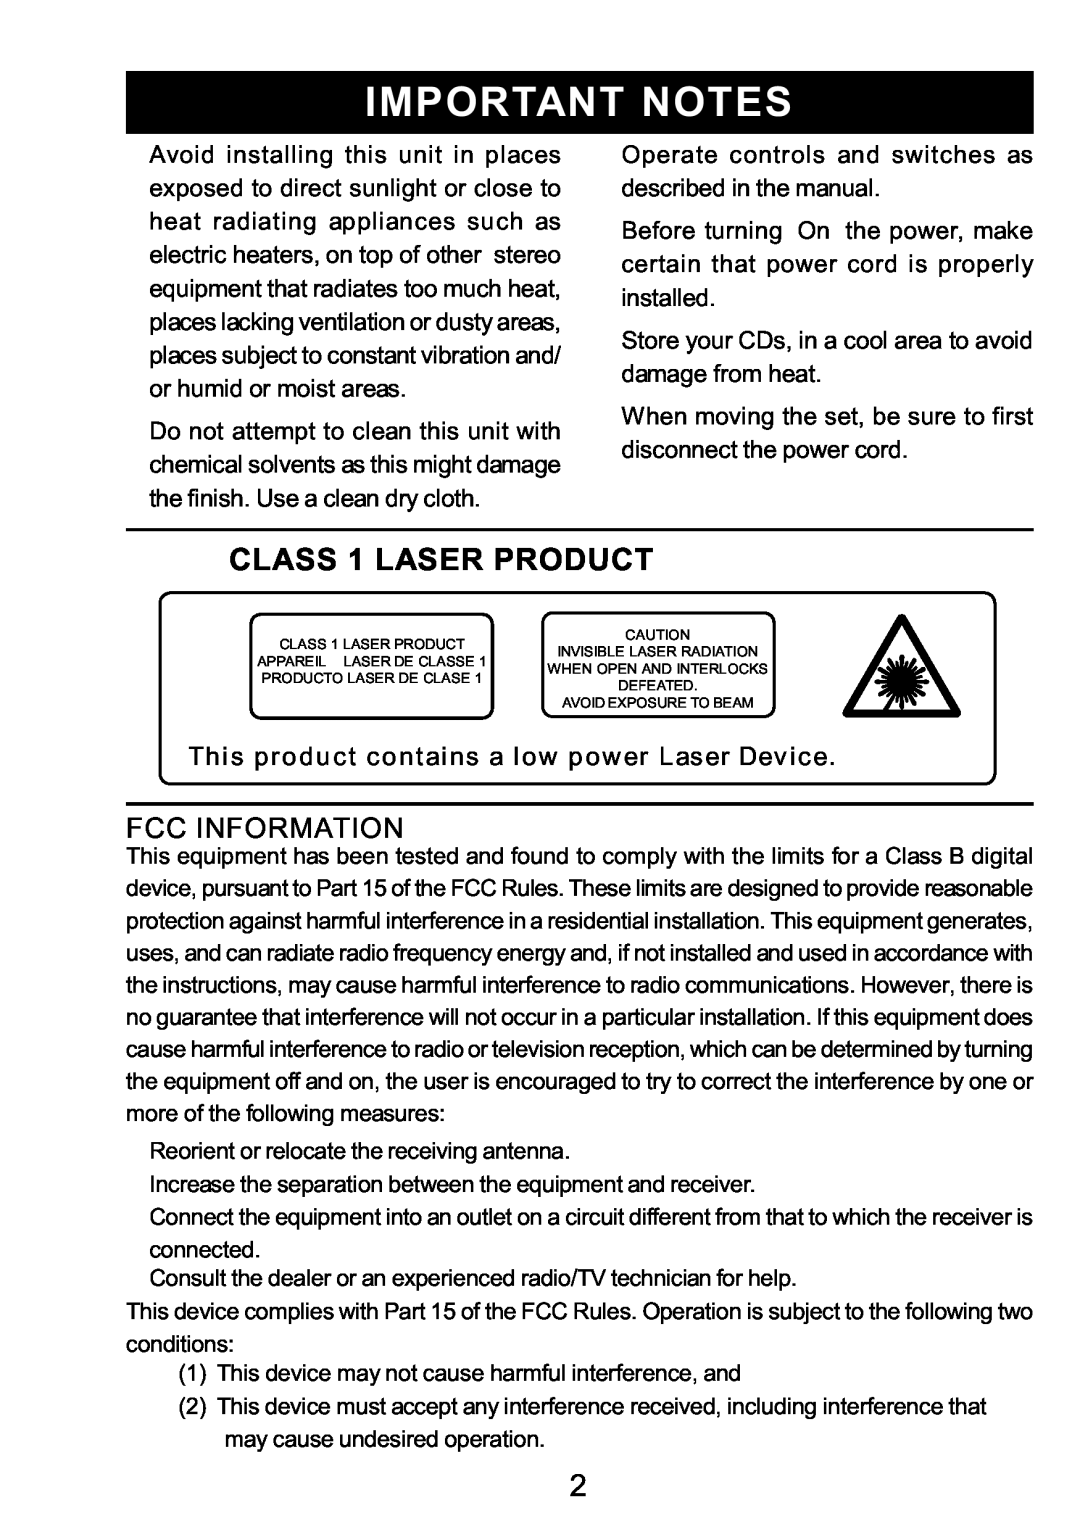 Sylvania SRCD3830 instruction manual Important Notes, CLASS 1 LASER PRODUCT 